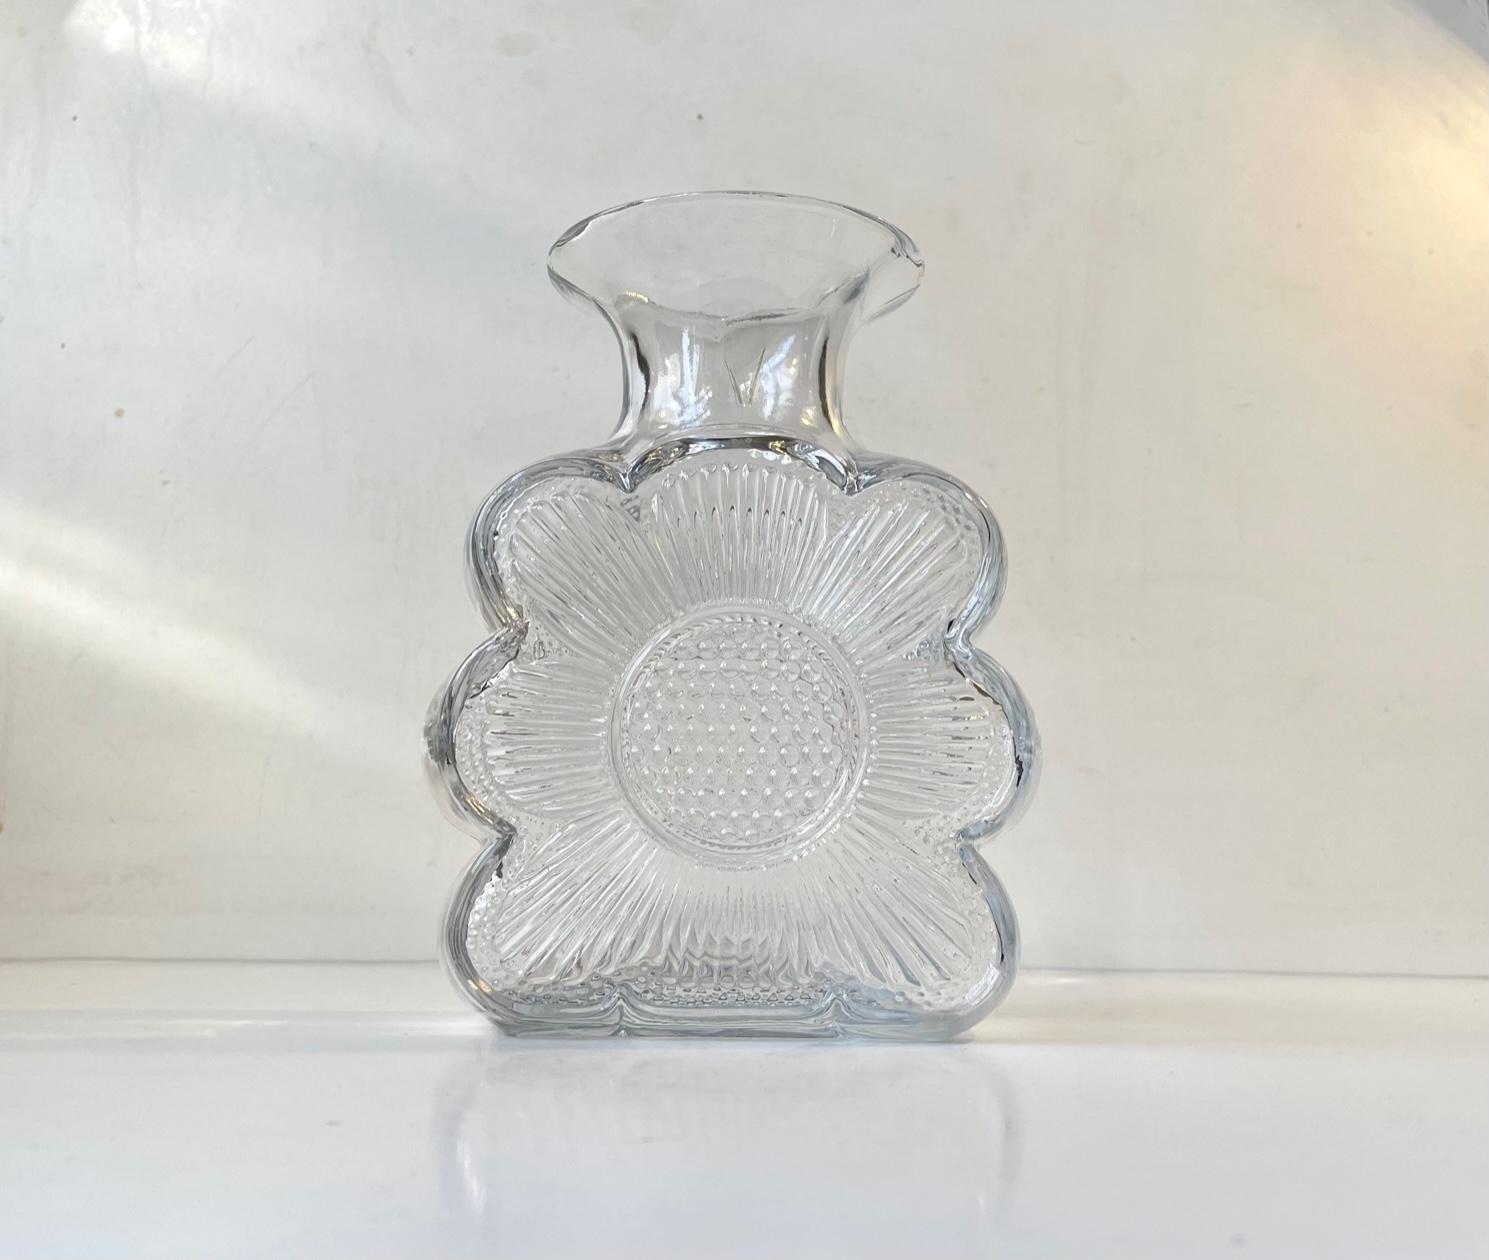 Clear Glass Vase with sunflower motif to both sides. Its called Amuletti Kinkas and was designed by Tamara Aladin and manufactured by Riihimäen Lasi in Finland during the 1960s or early 70s. Measurements: H: 20 cm, W/D: 15/8 cm.